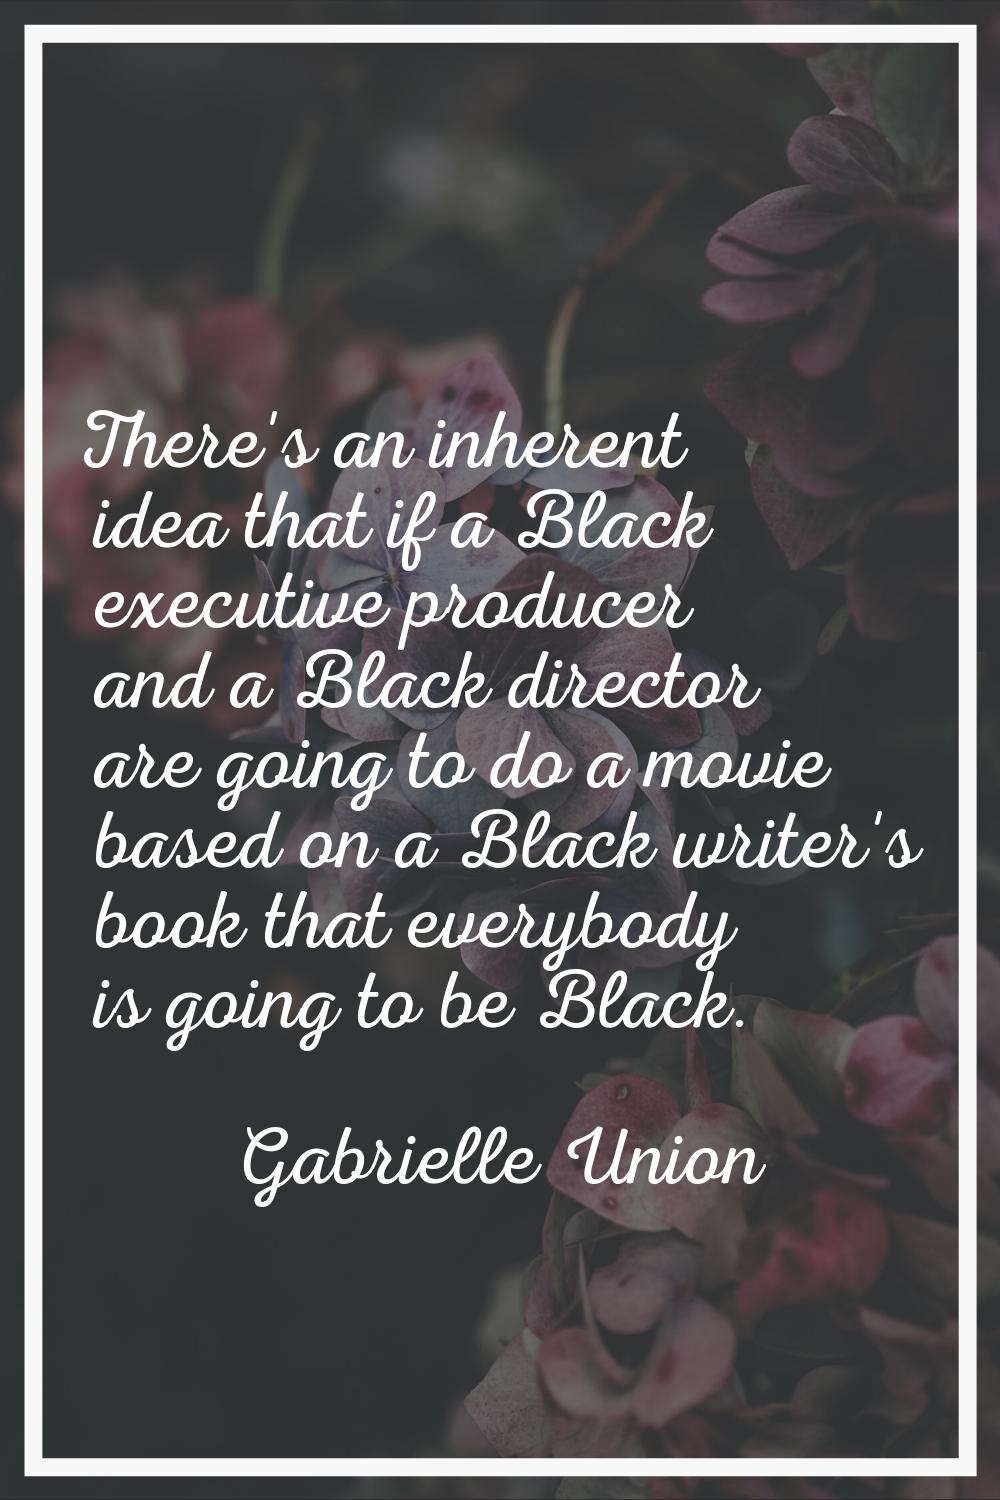 There's an inherent idea that if a Black executive producer and a Black director are going to do a 